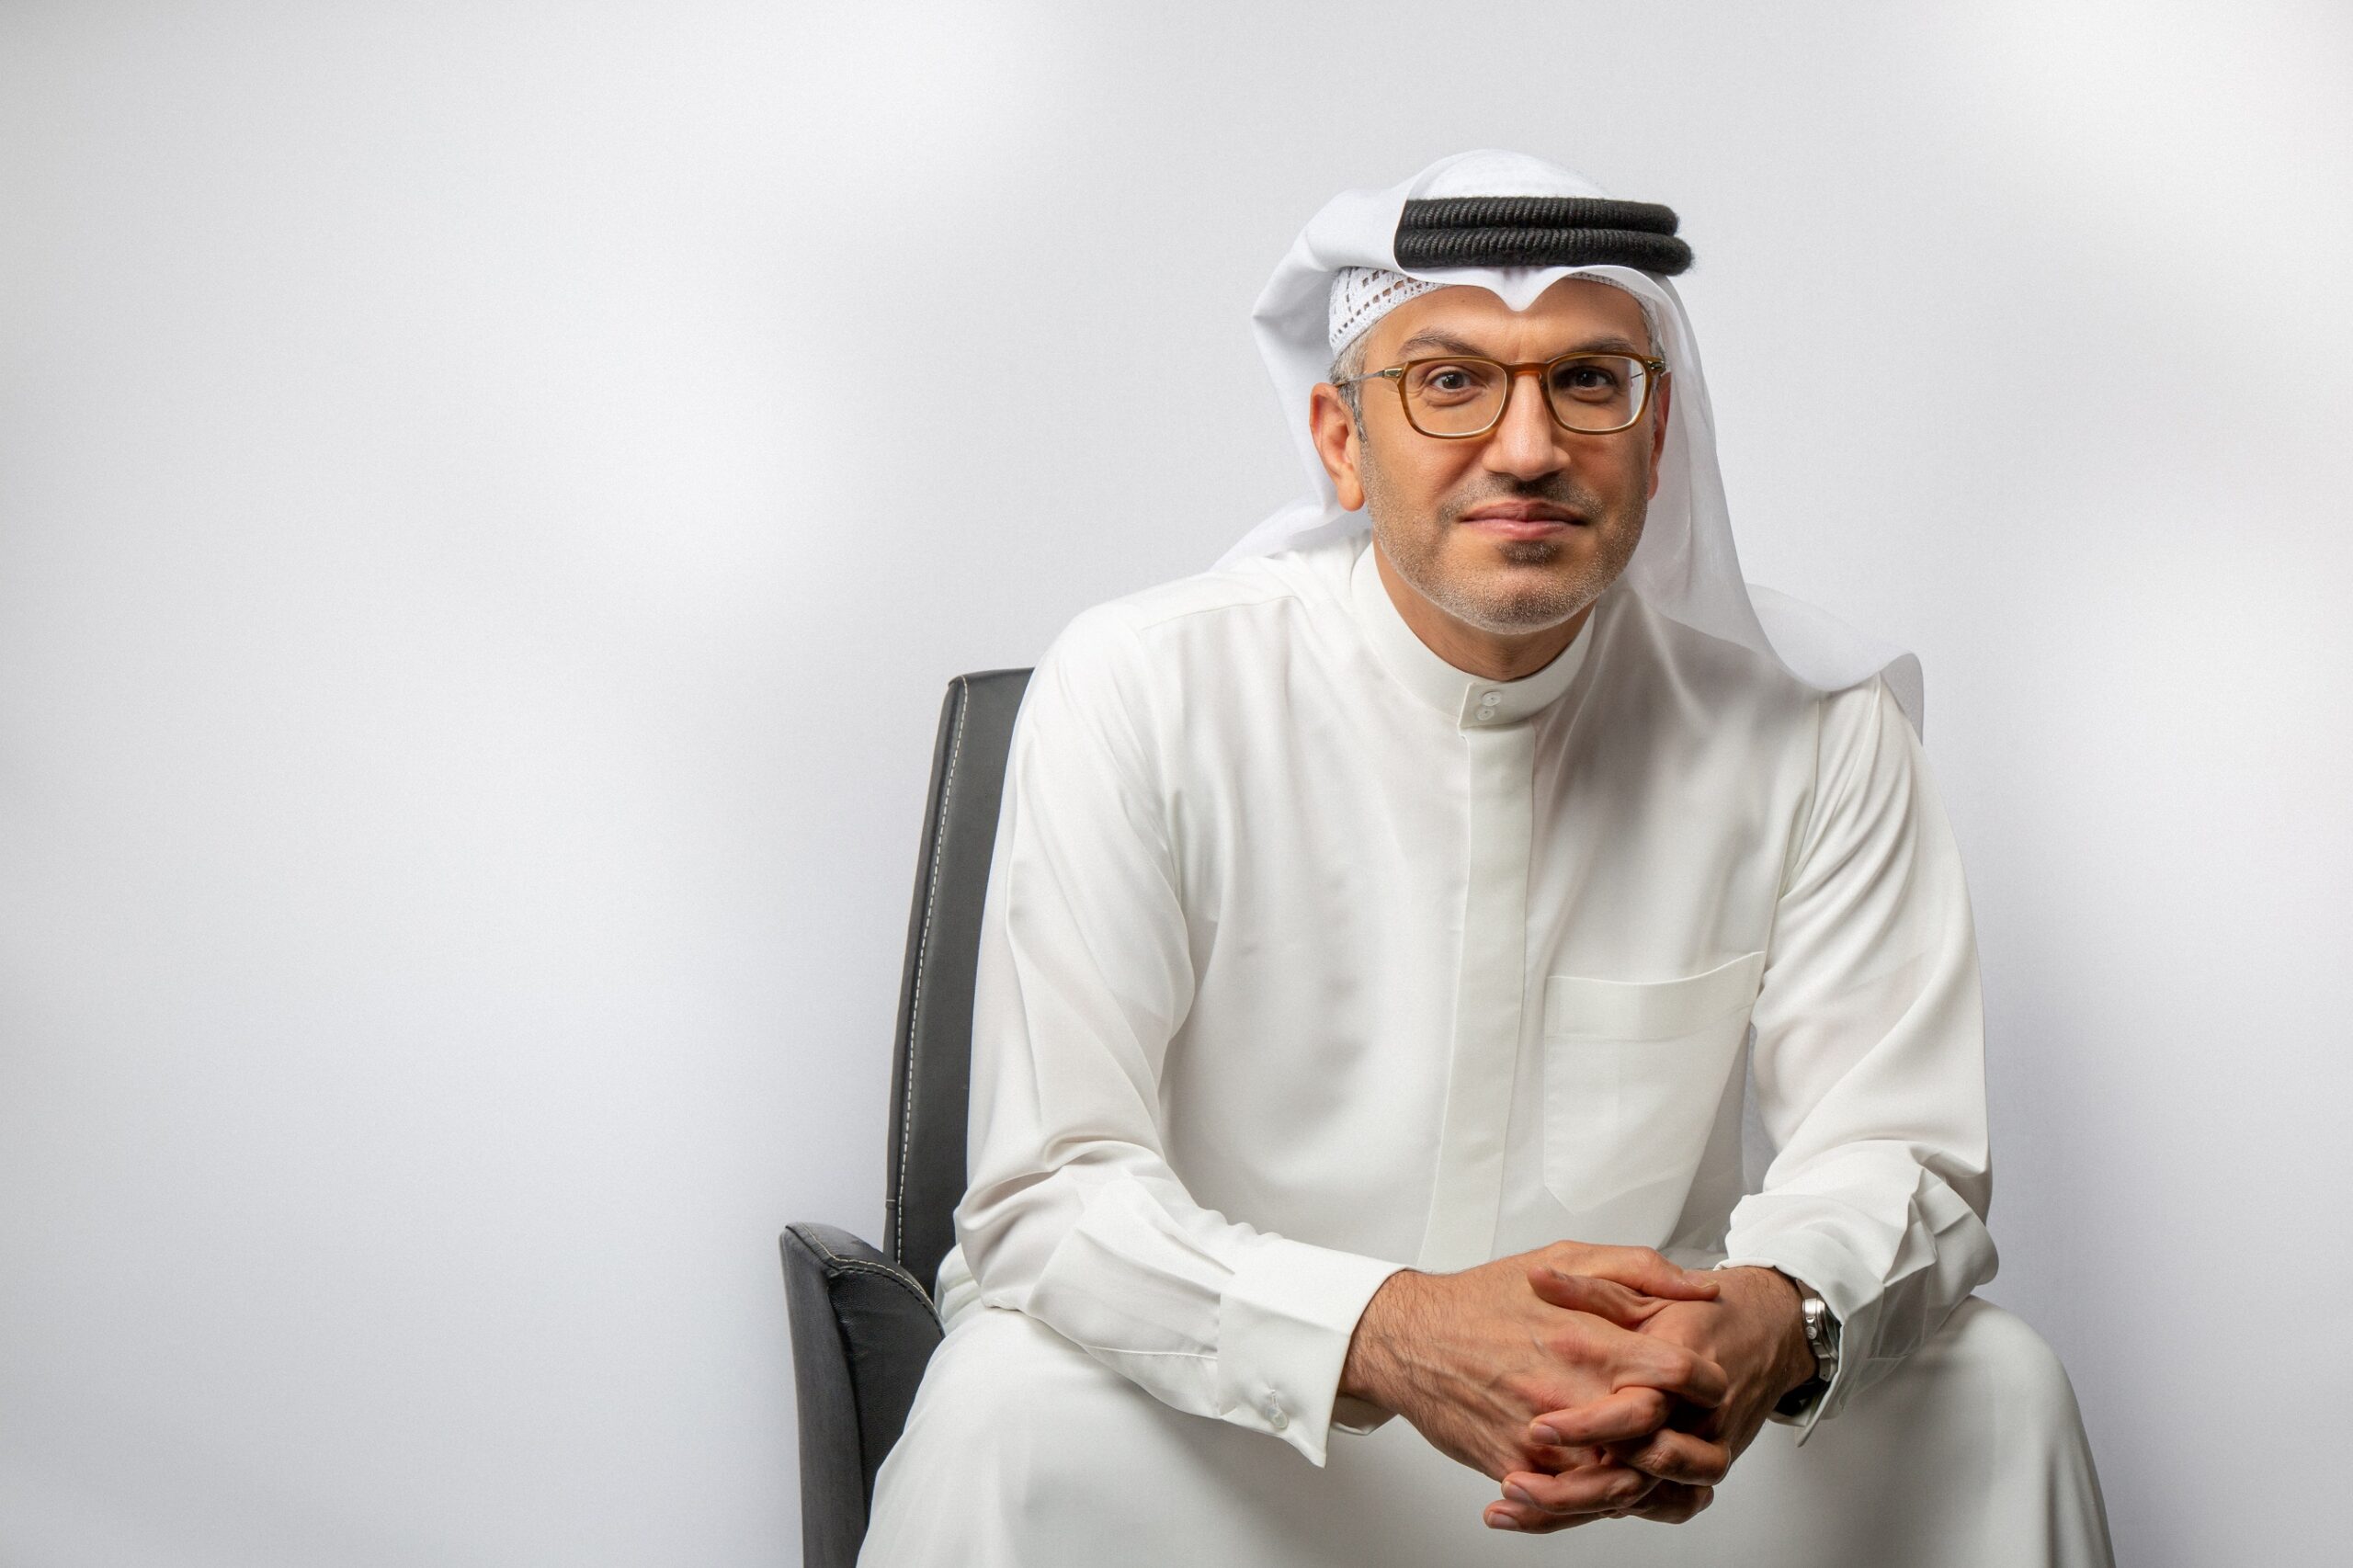 Image for Dubai South Completes Blockchain Integration System in Partnership With Dubai Customs